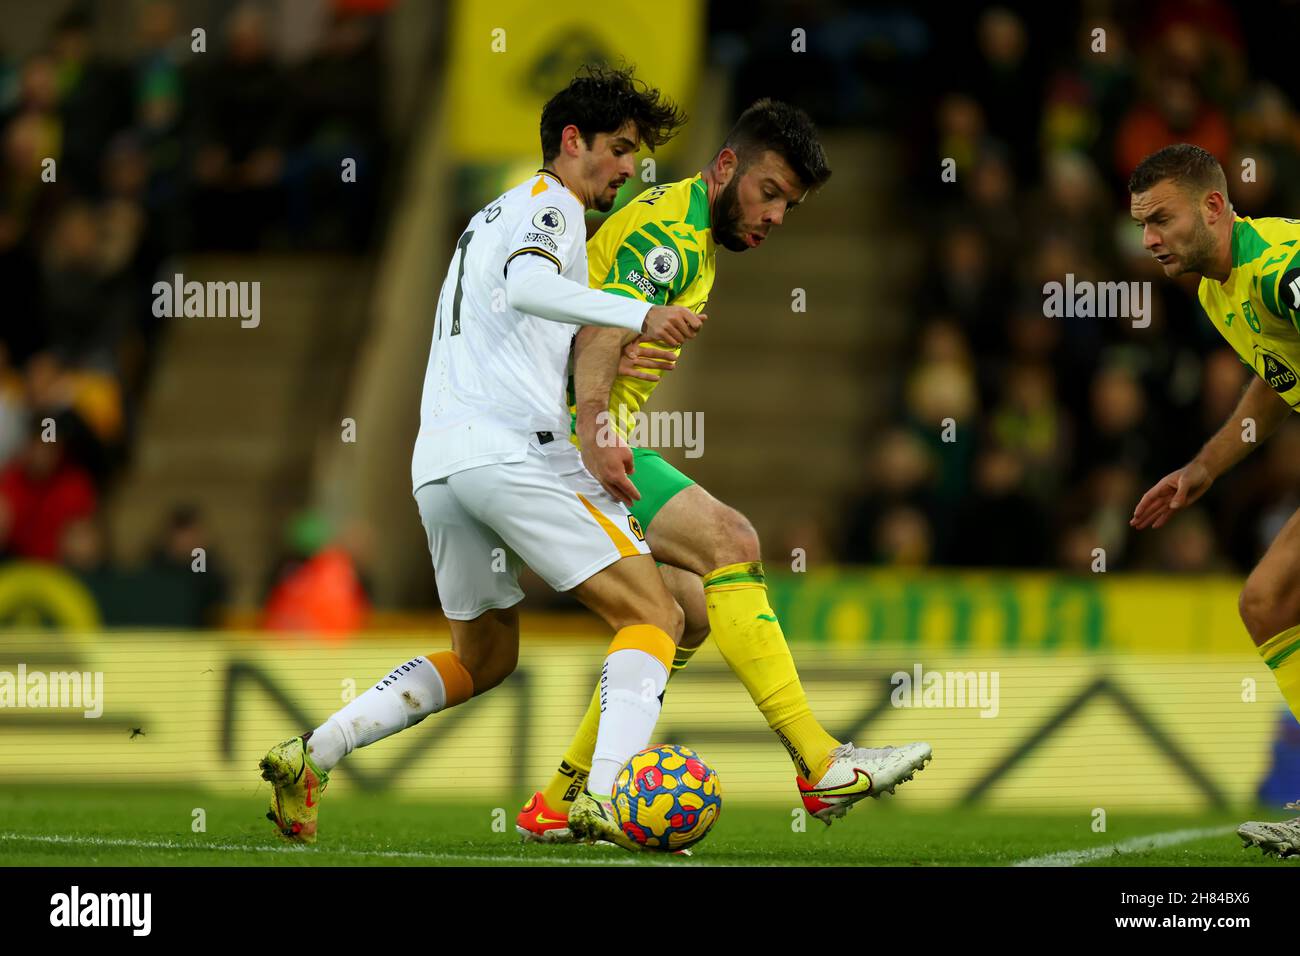 Carrow Road, Norwich, Norforlk, UK. 27th Nov, 2021. Premier League football, Norwich versus Wolverhampton Wanderers; Trinc&#xe3;o of Wolverhampton Wanderers competes for the ball with Grant Hanley of Norwich City Credit: Action Plus Sports/Alamy Live News Stock Photo